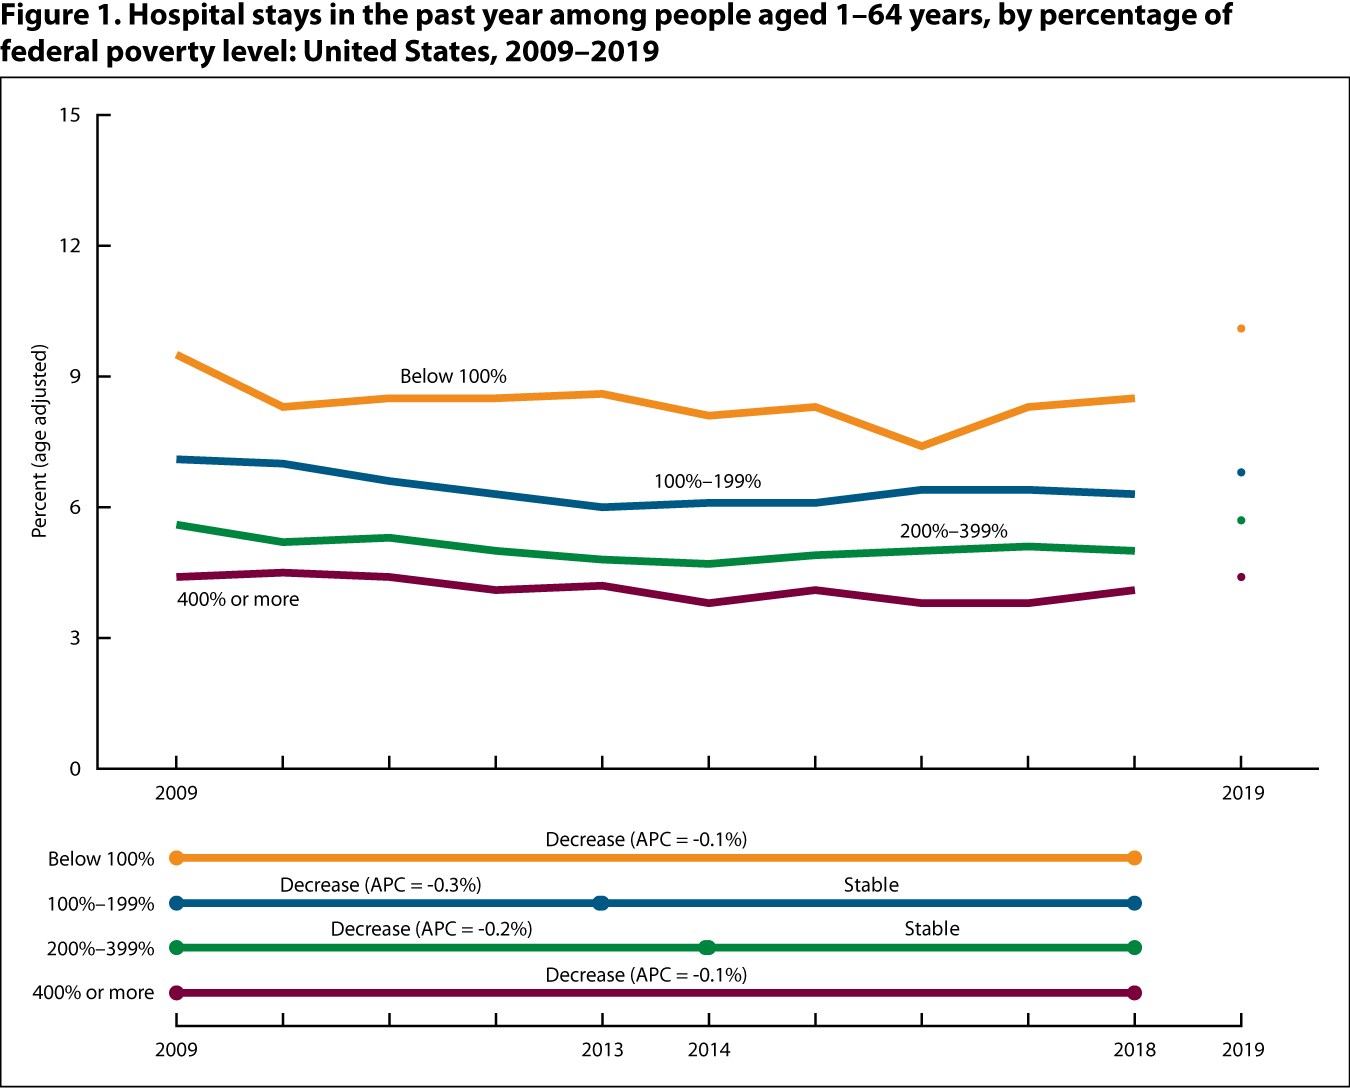 Figure 1 is a line graph showing the percentage of people aged 1–64 with a hospital stay in the past year, by percentage of federal poverty level for 2009 through 2018 (line) and at 2019 (point).